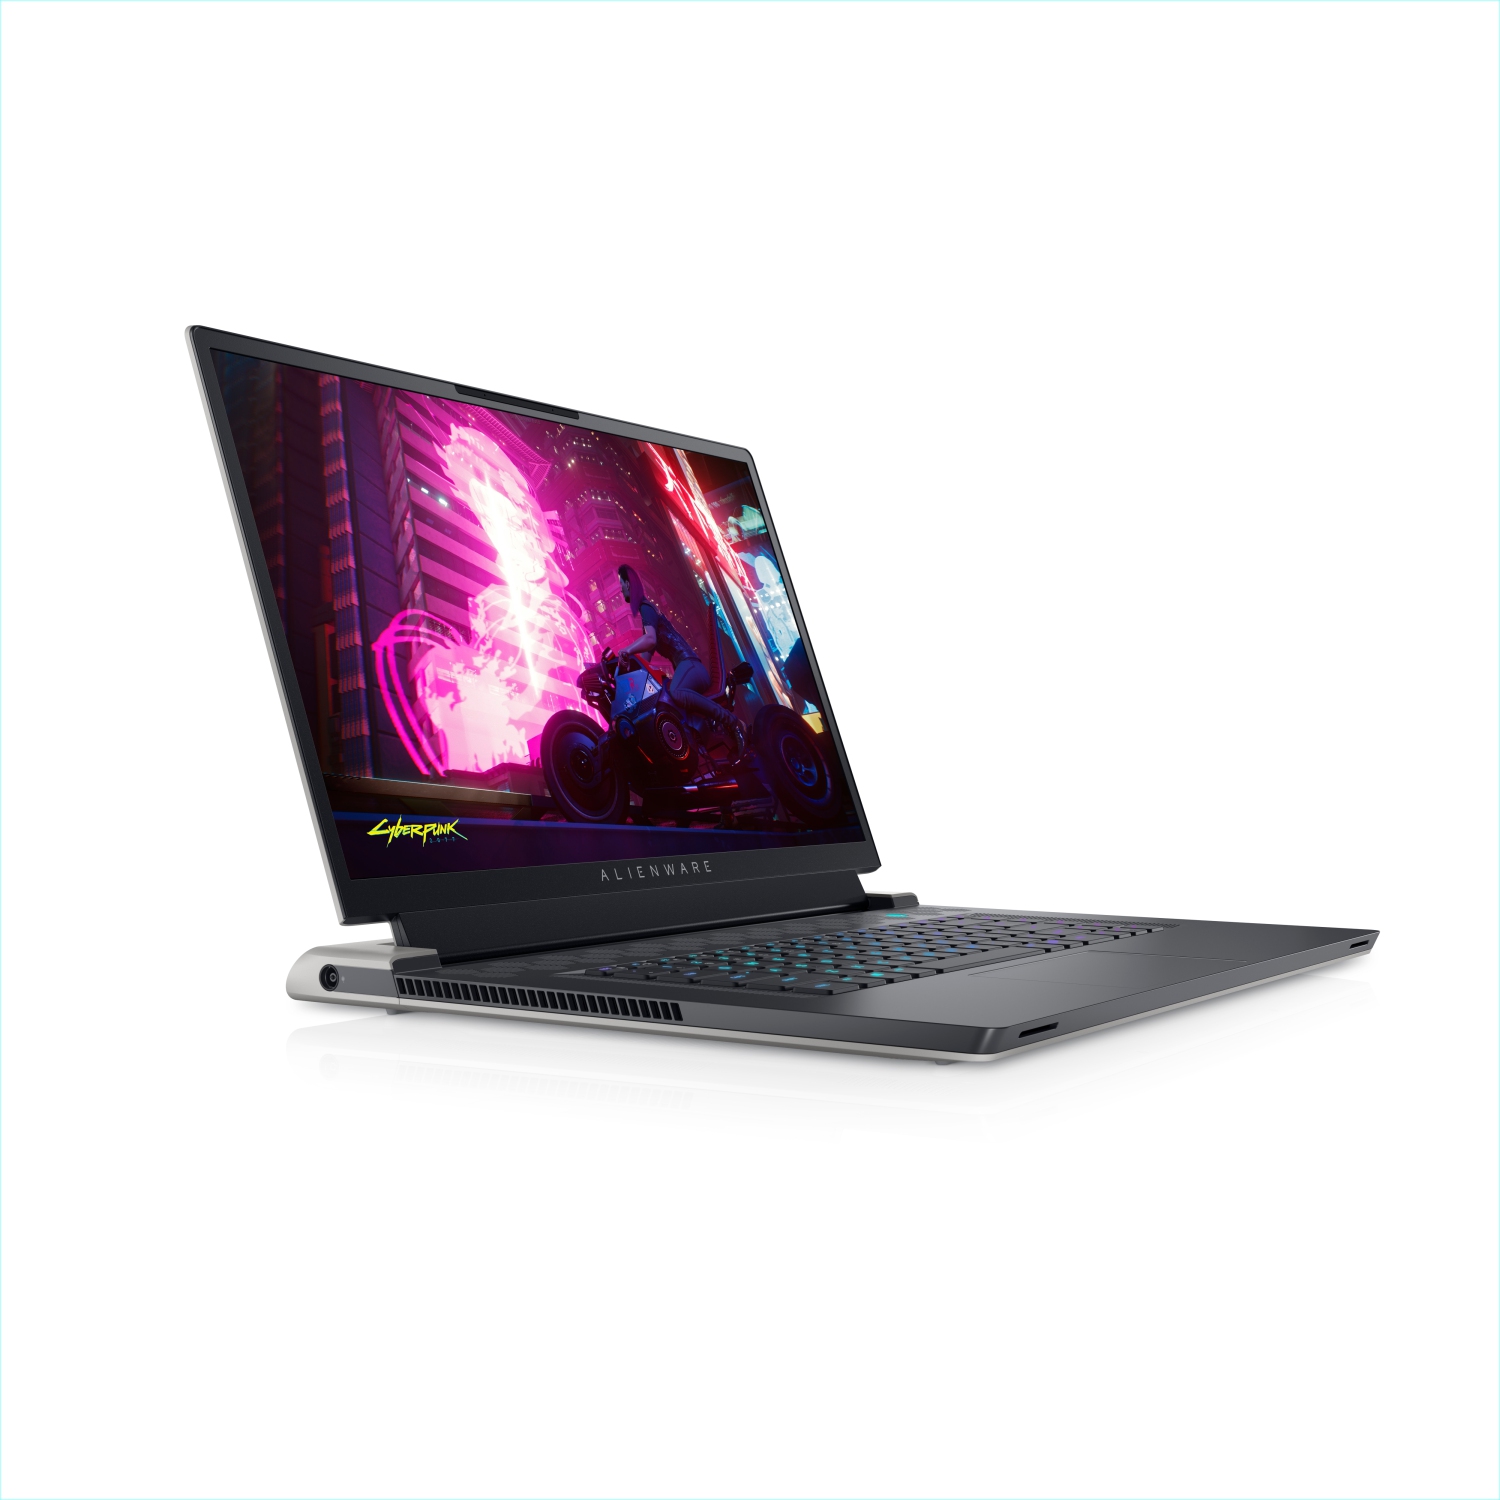 Refurbished (Excellent) – Dell Alienware X17 R1 Gaming Laptop (2021) | 17.3" FHD | Core i7 - 2TB SSD - 64GB RAM - RTX 3070 | 8 Cores @ 4.6 GHz - 11th Gen CPU - 8GB GDDR6